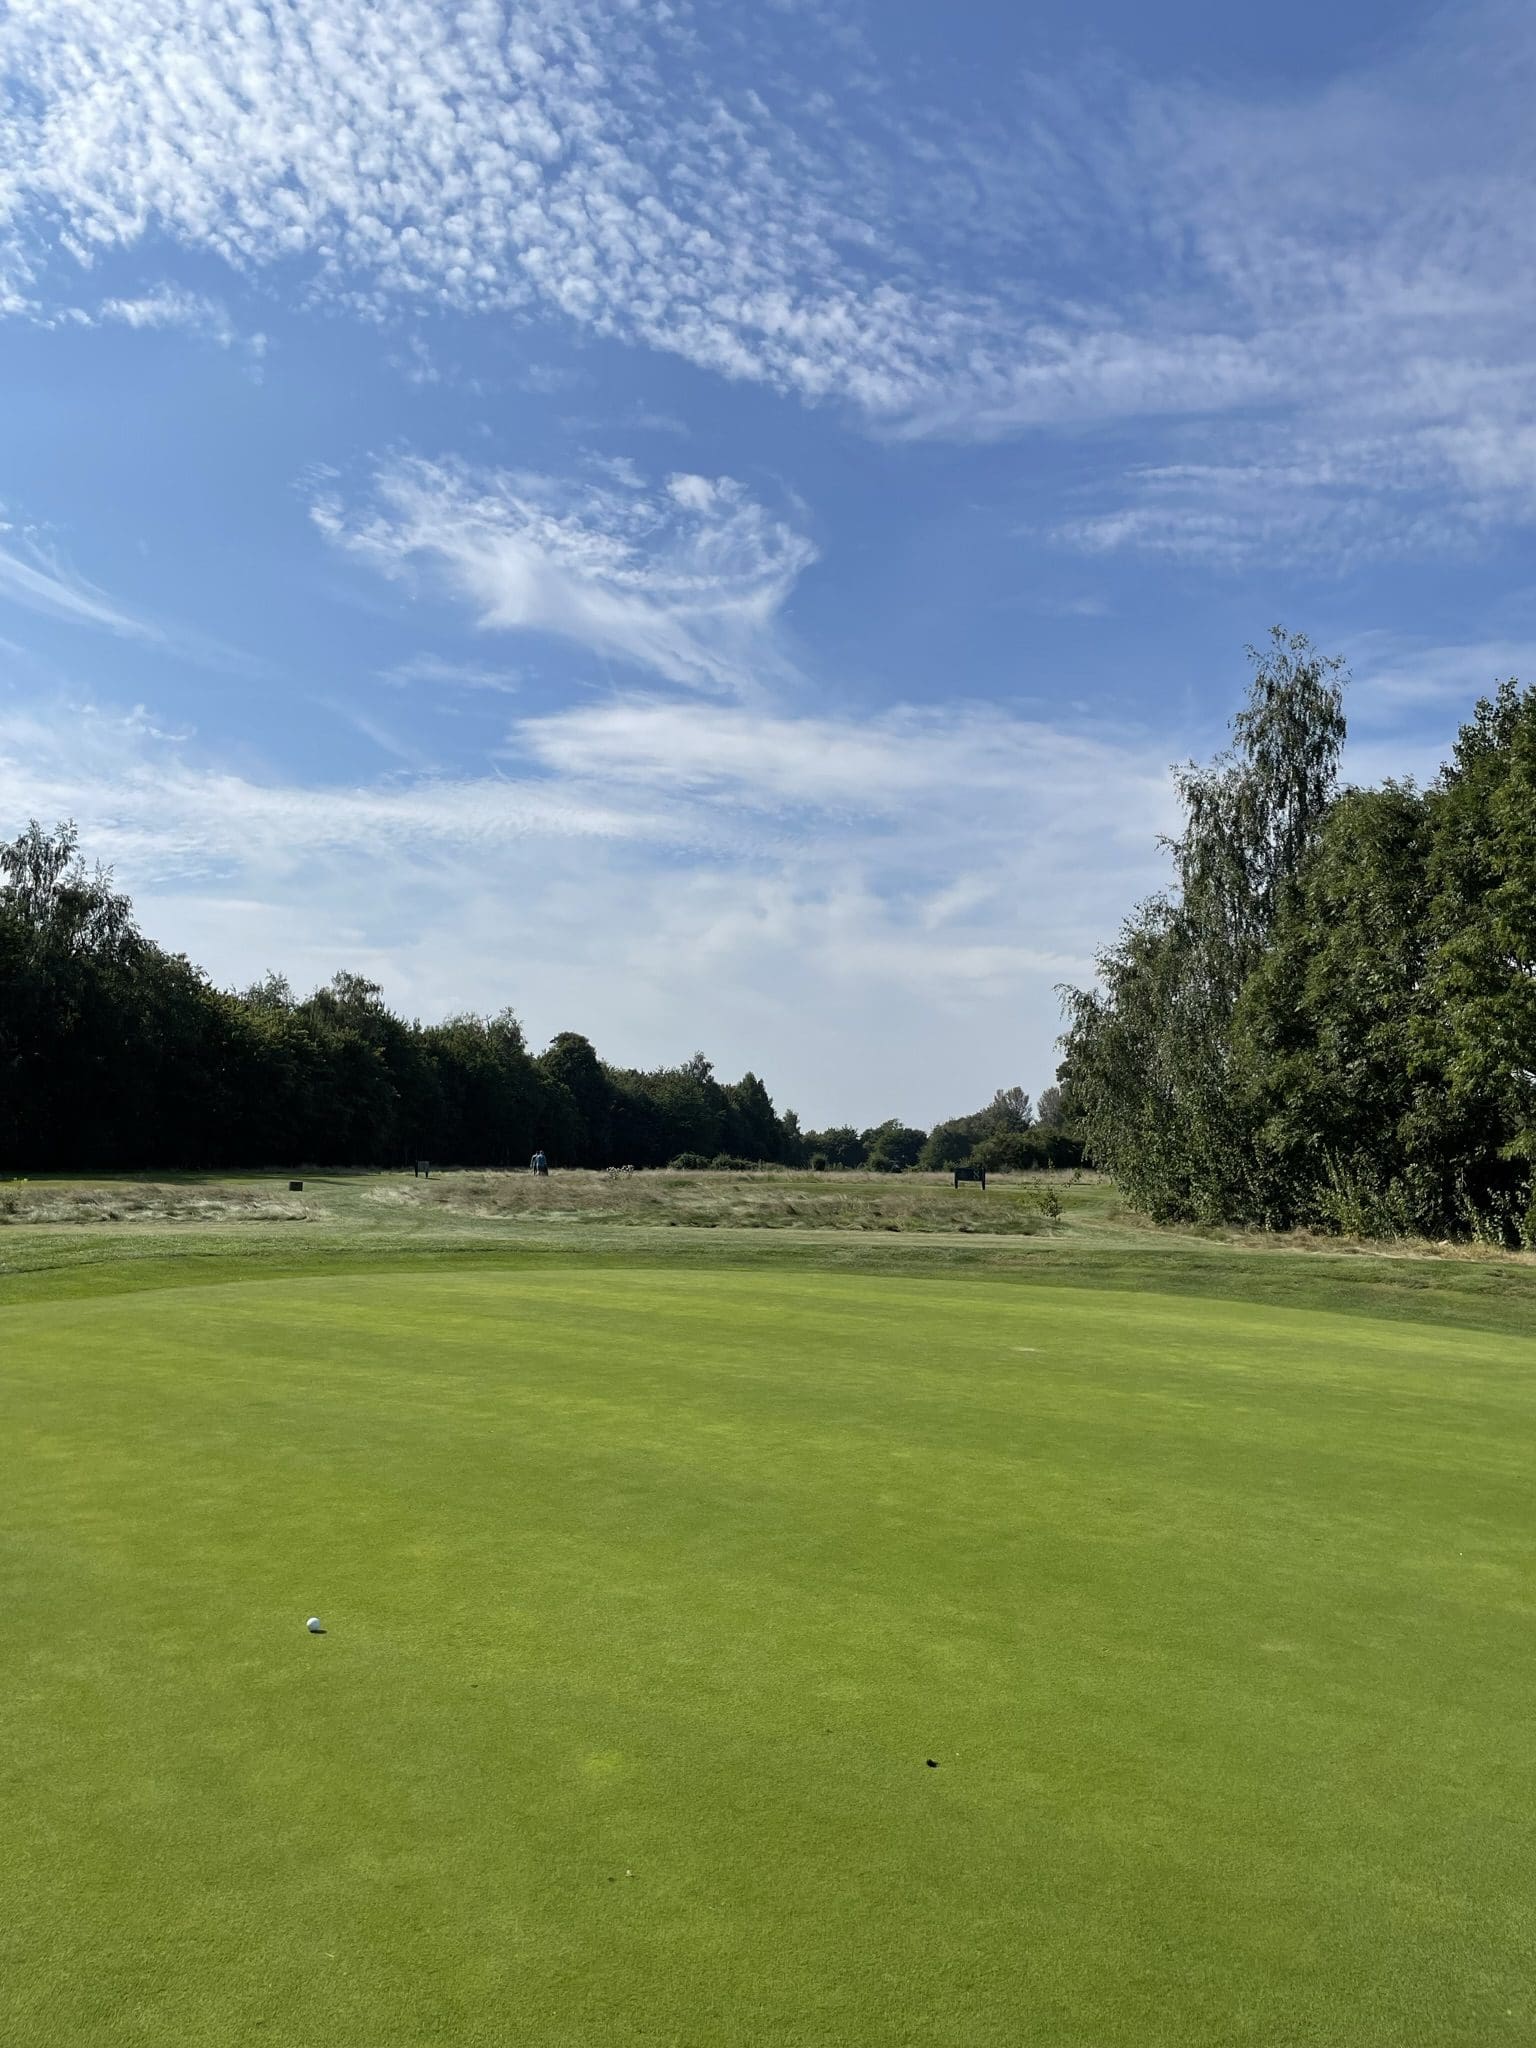 Golf course at Owston Hall Hotel Doncaster